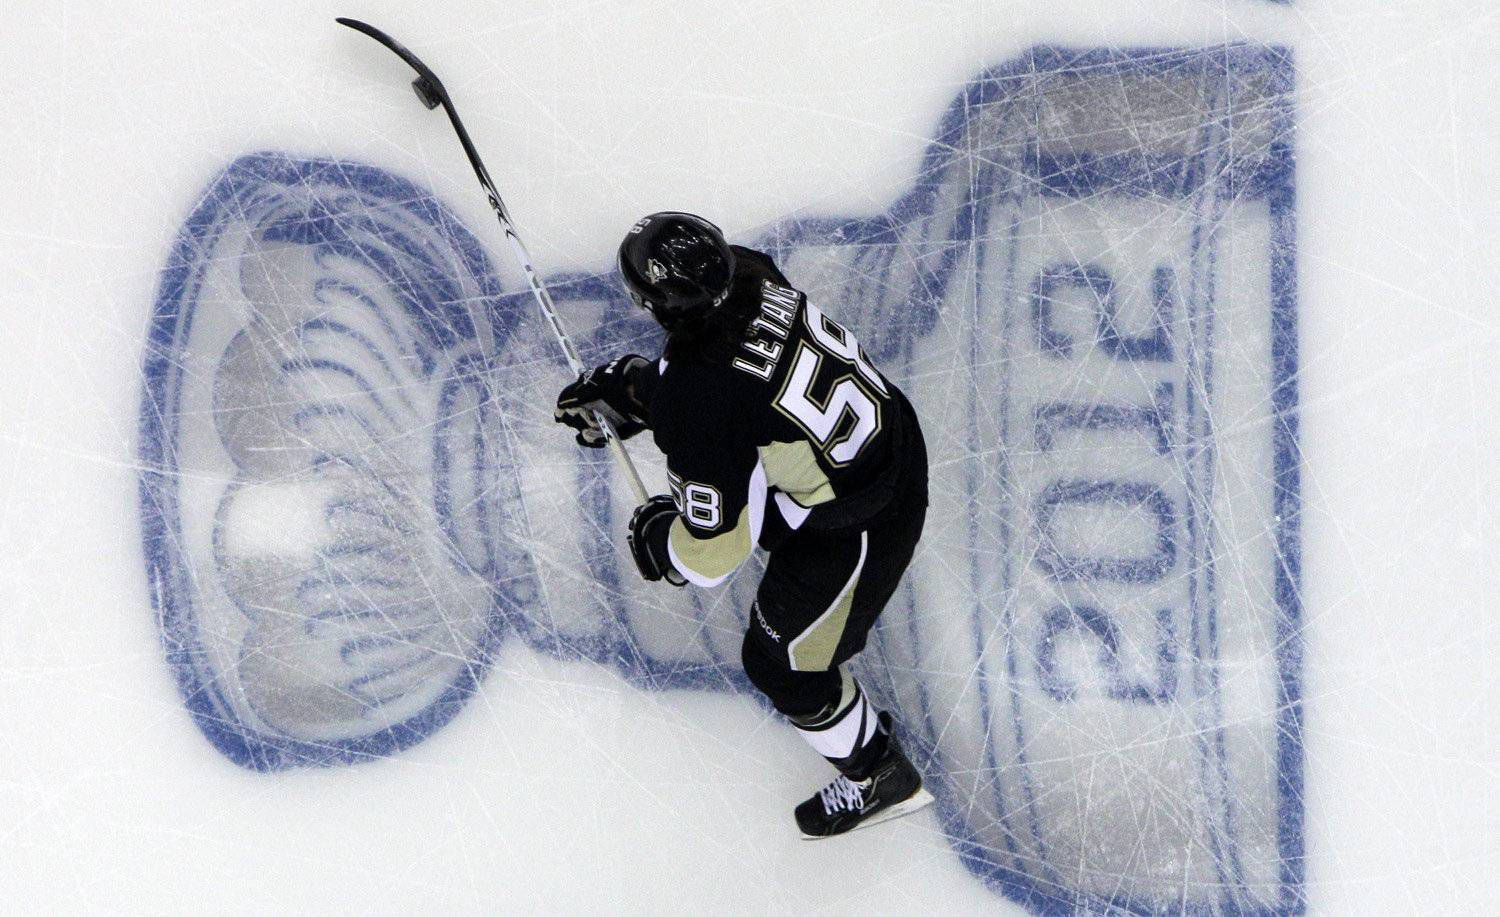 Kris Letang In Action On The Ice Rink Wallpaper